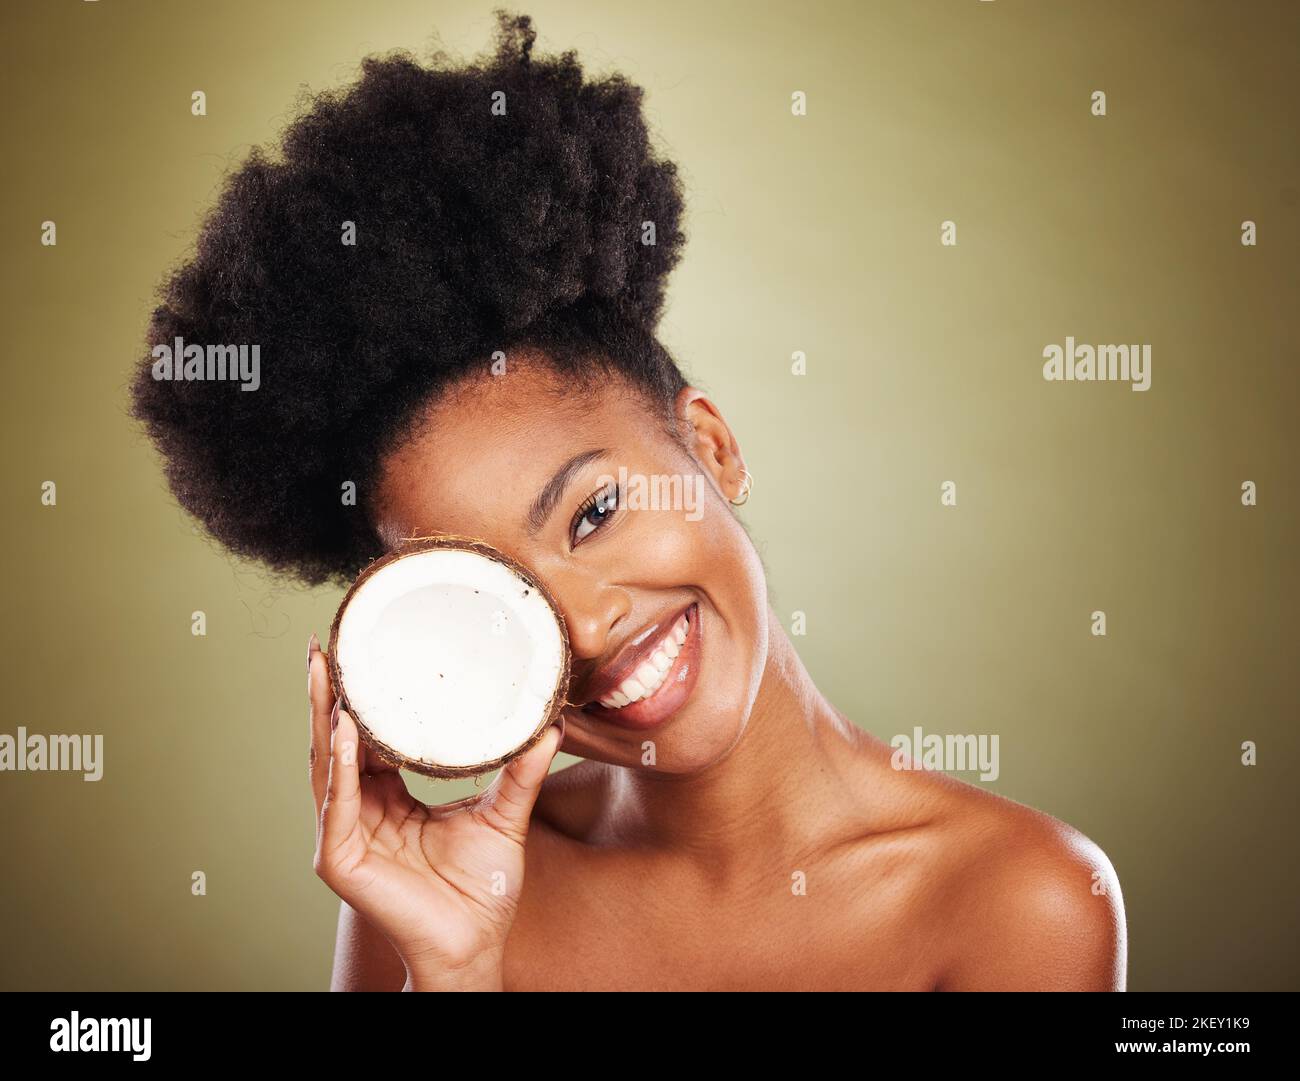 Beauty, skincare and coconut with portrait of black woman for health, moisture and natural cosmetics. Spa, antioxidants and self care with girl model Stock Photo